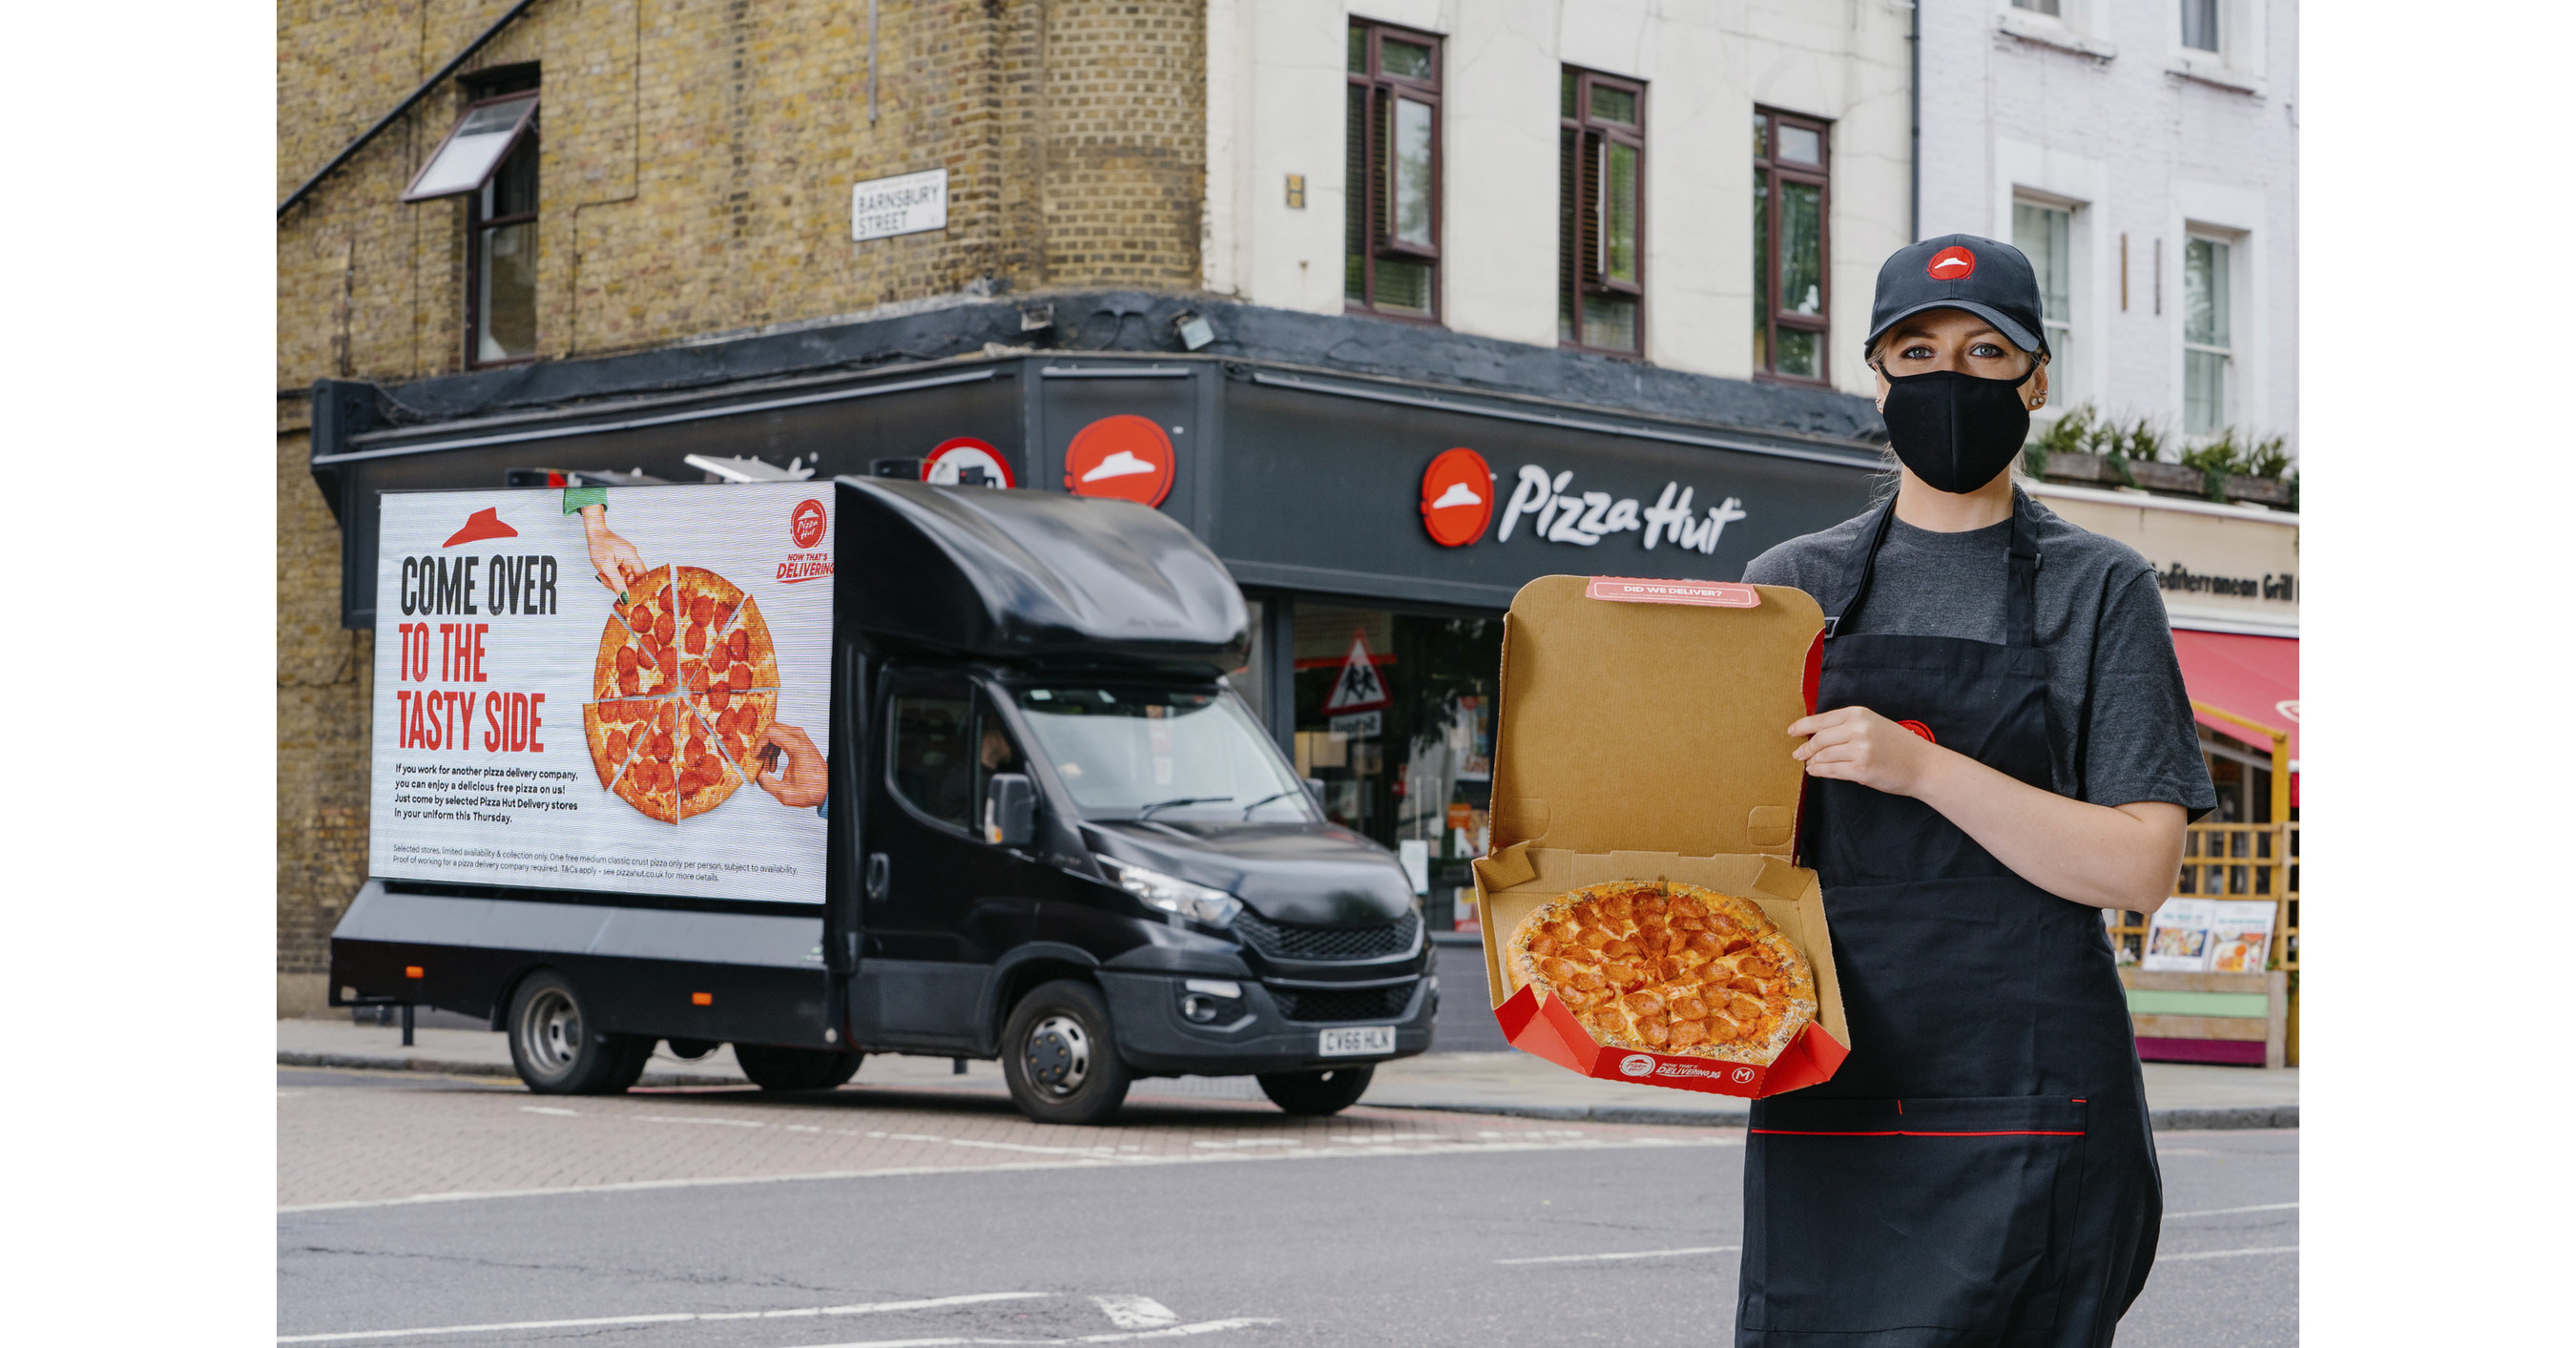 You can get Pizza Hut's pizza at the comfort of your home by ordering online